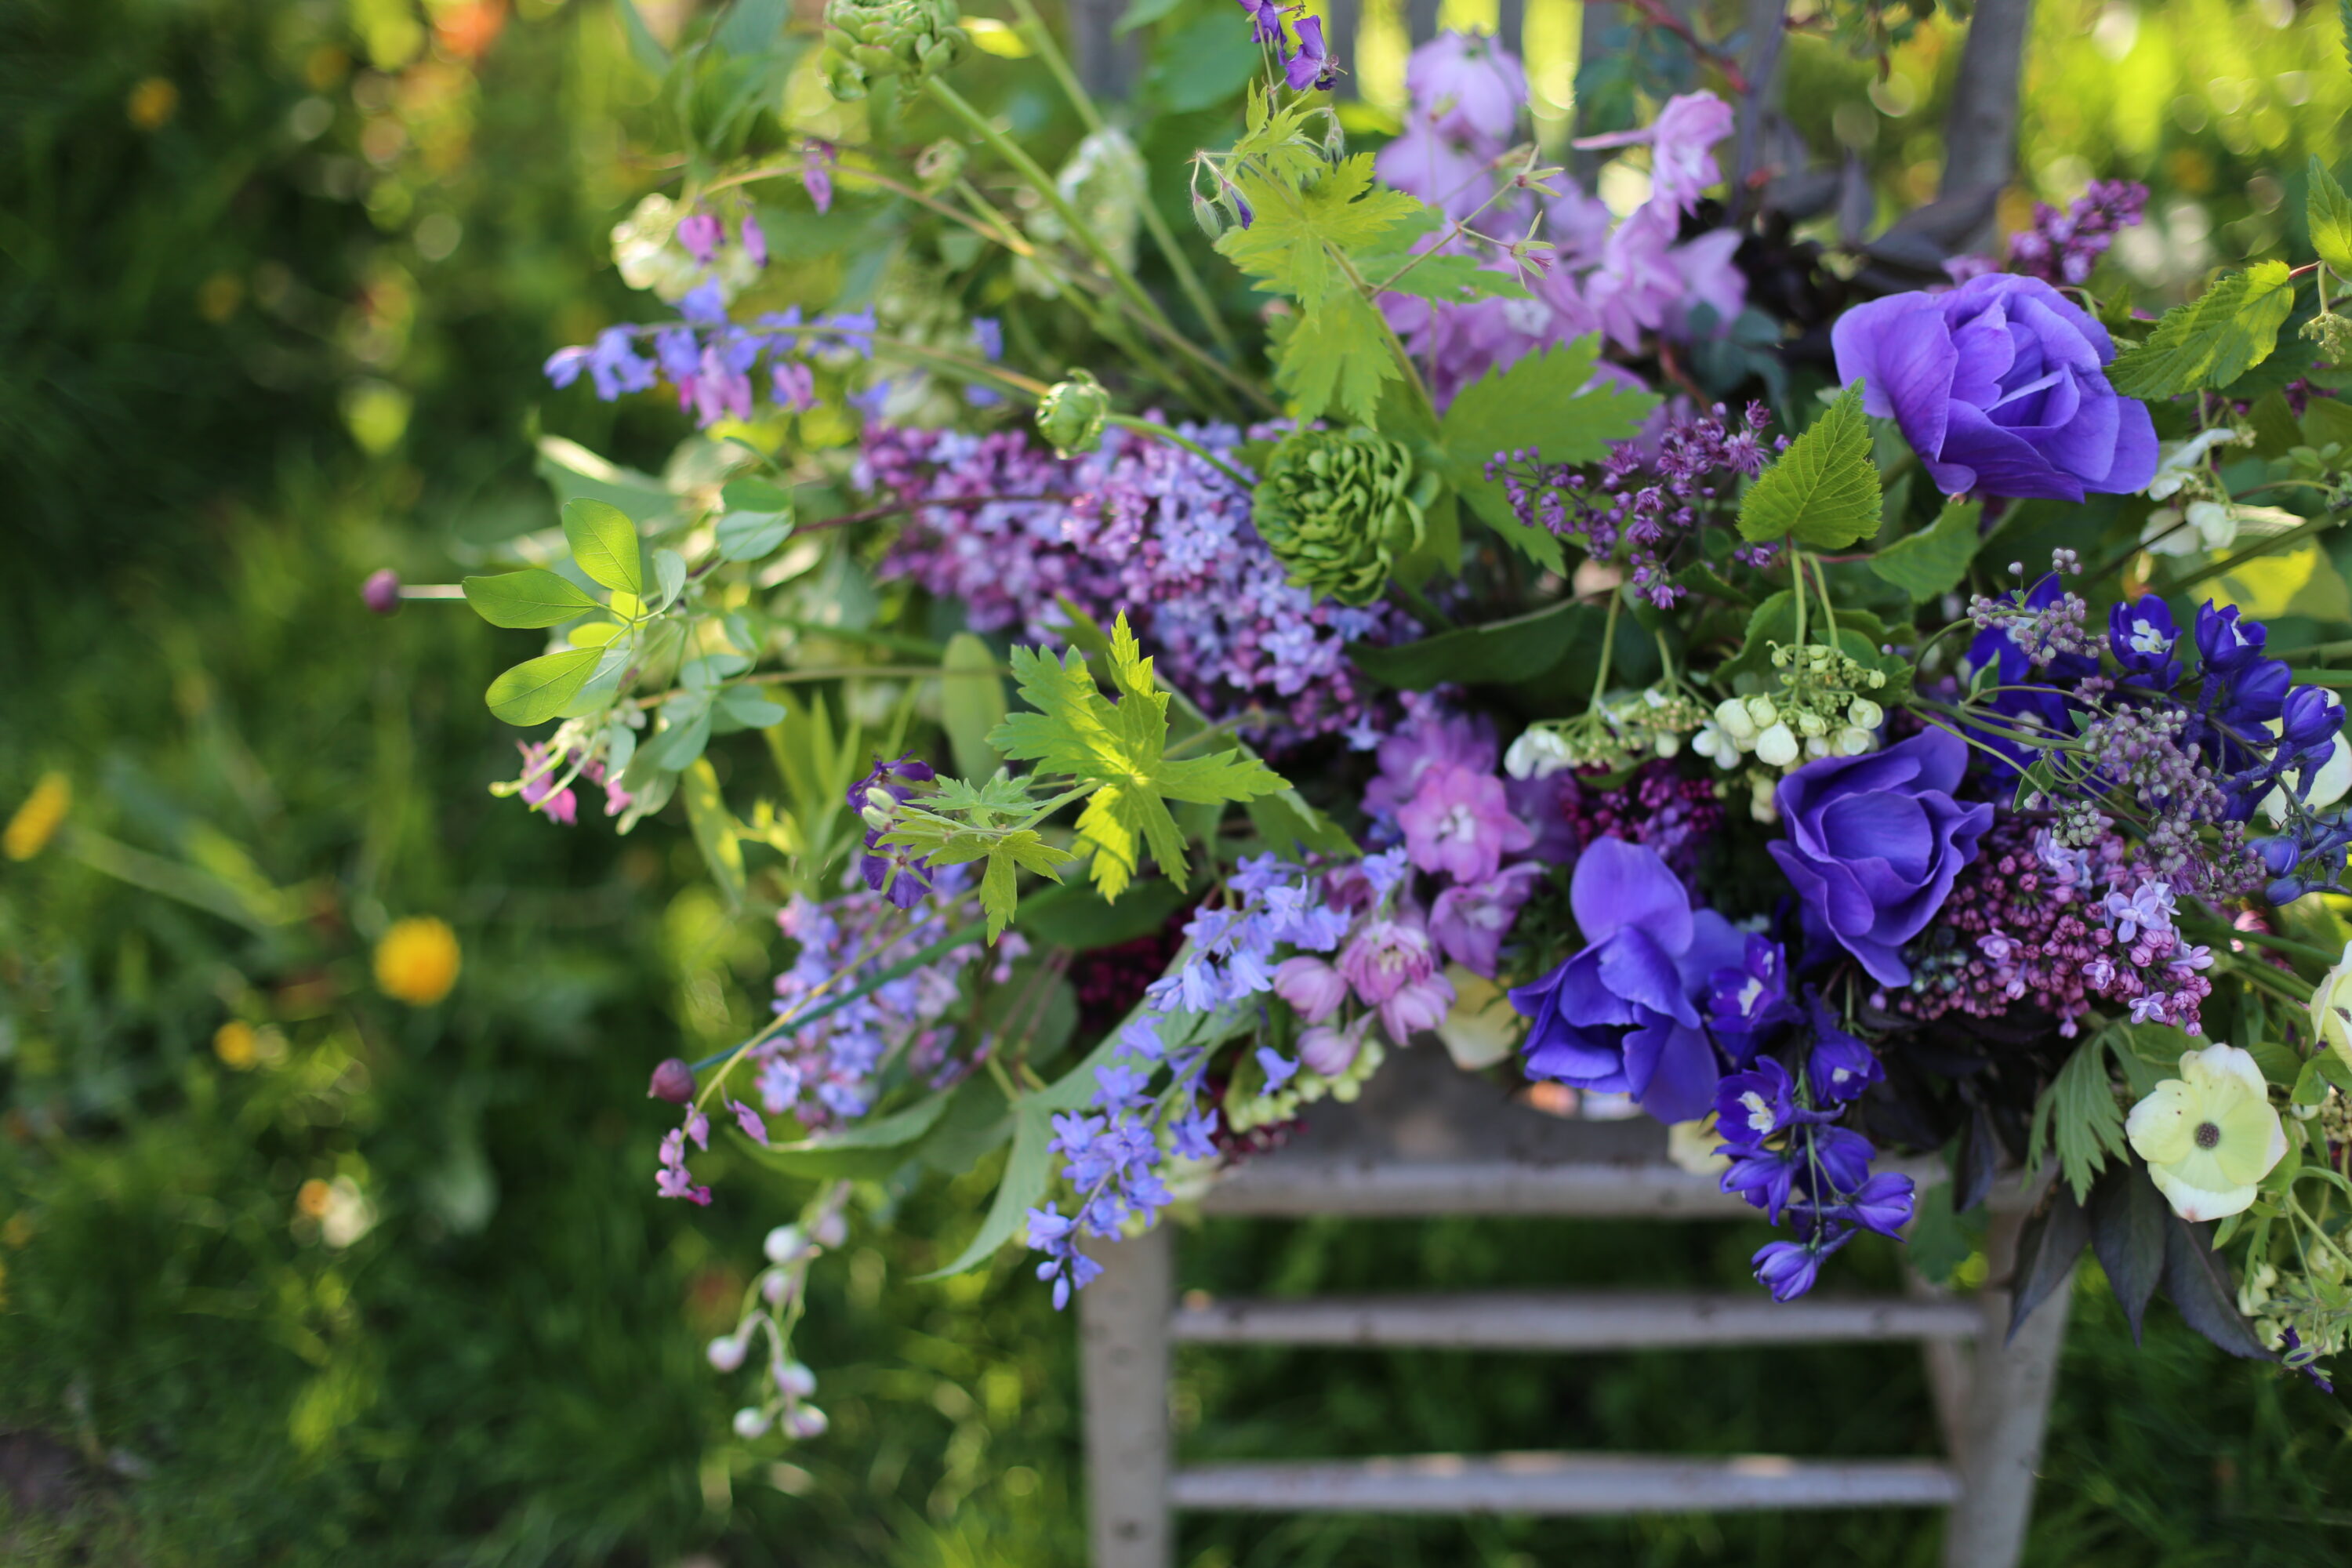 A bouquet of blue and purple flowers